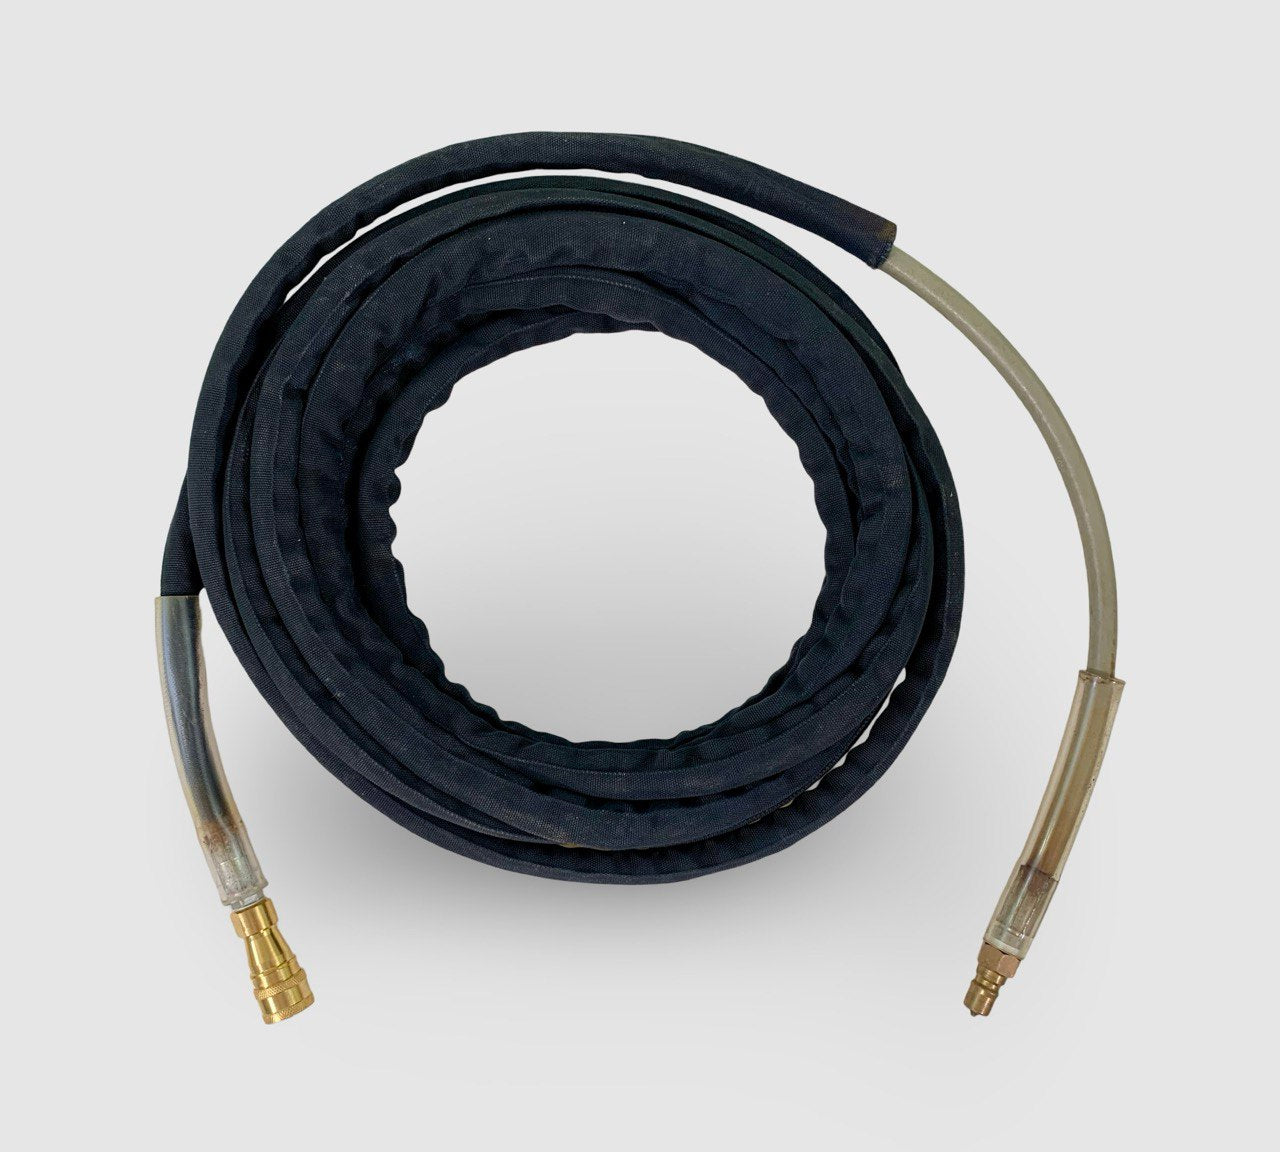 PRE-OWNED 25ft / 7.6m Partially V2 Heat Insulated High Pressure Solution Hose - fitted with Standard Male & Female Connector